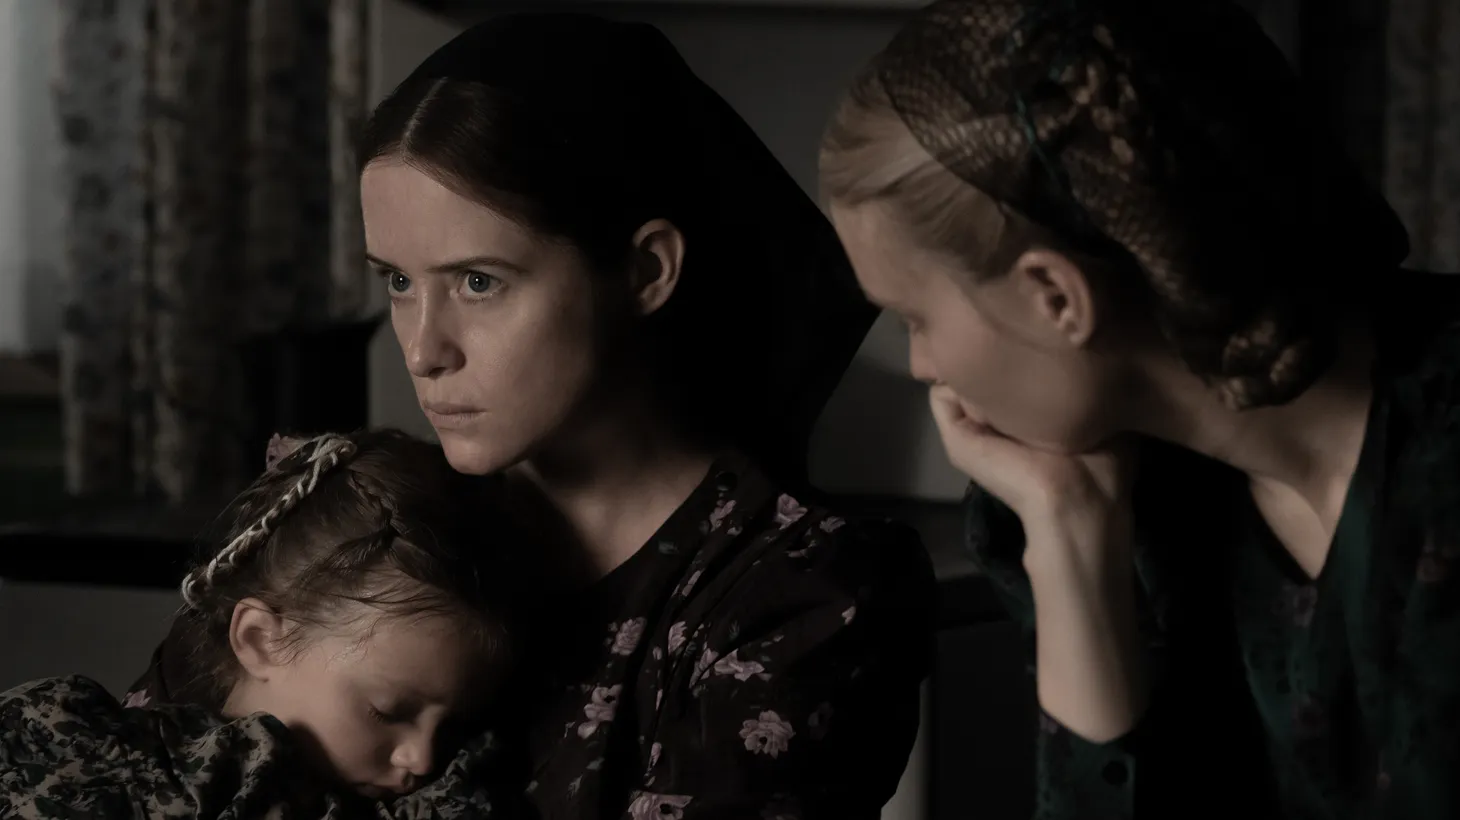 L to R: Emily Mitchell stars as Miep, Claire Foy as Salome, and Rooney Mara as Ona in “Women Talking.”